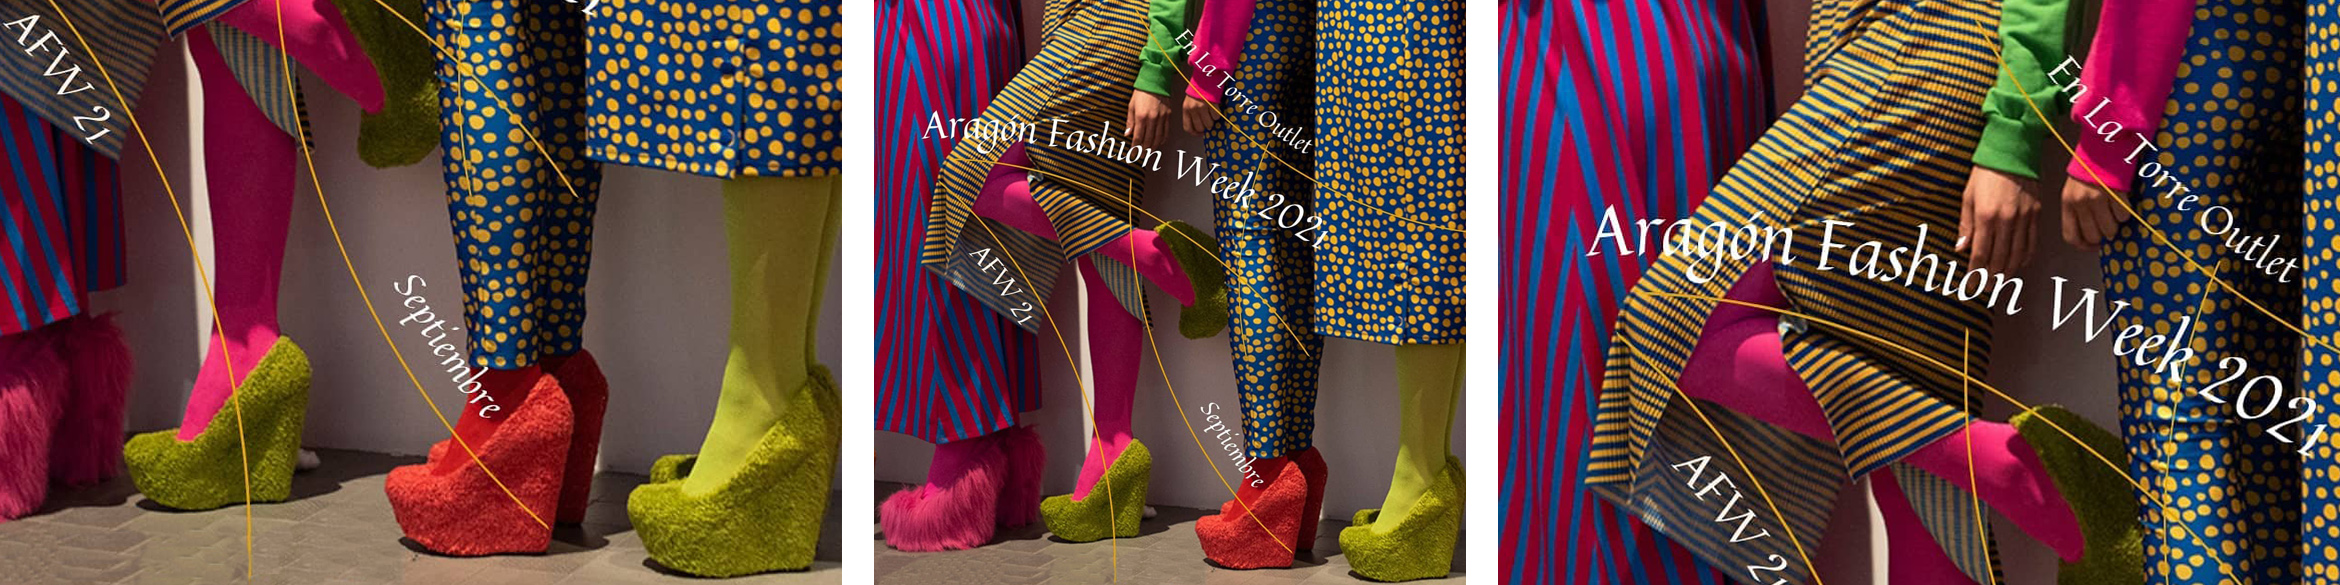 La Torre Outlet Zaragoza will host the next edition of Aragón Fashion Week